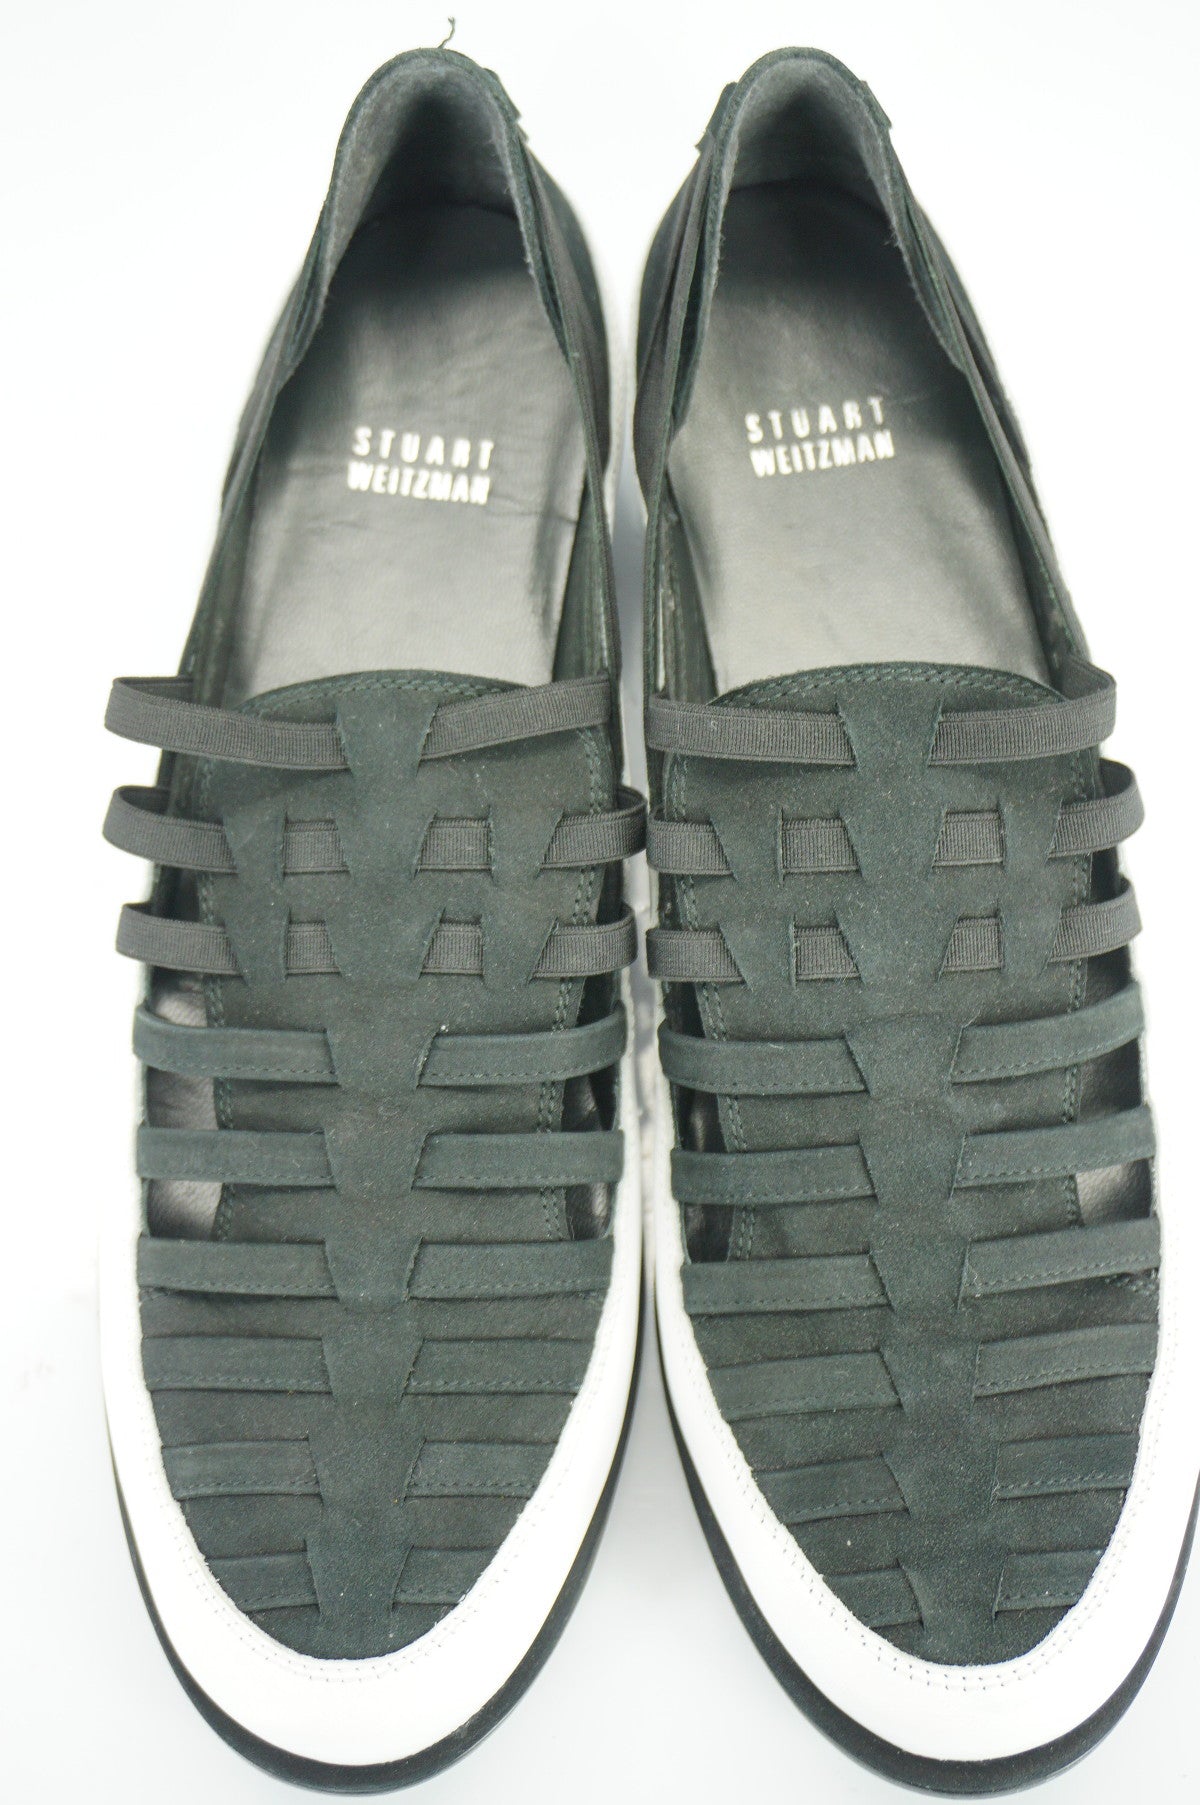 Stuart Weitzman Move In Elastic Stretch Caged Flat Sneakers Size 9.5 NIB Women's